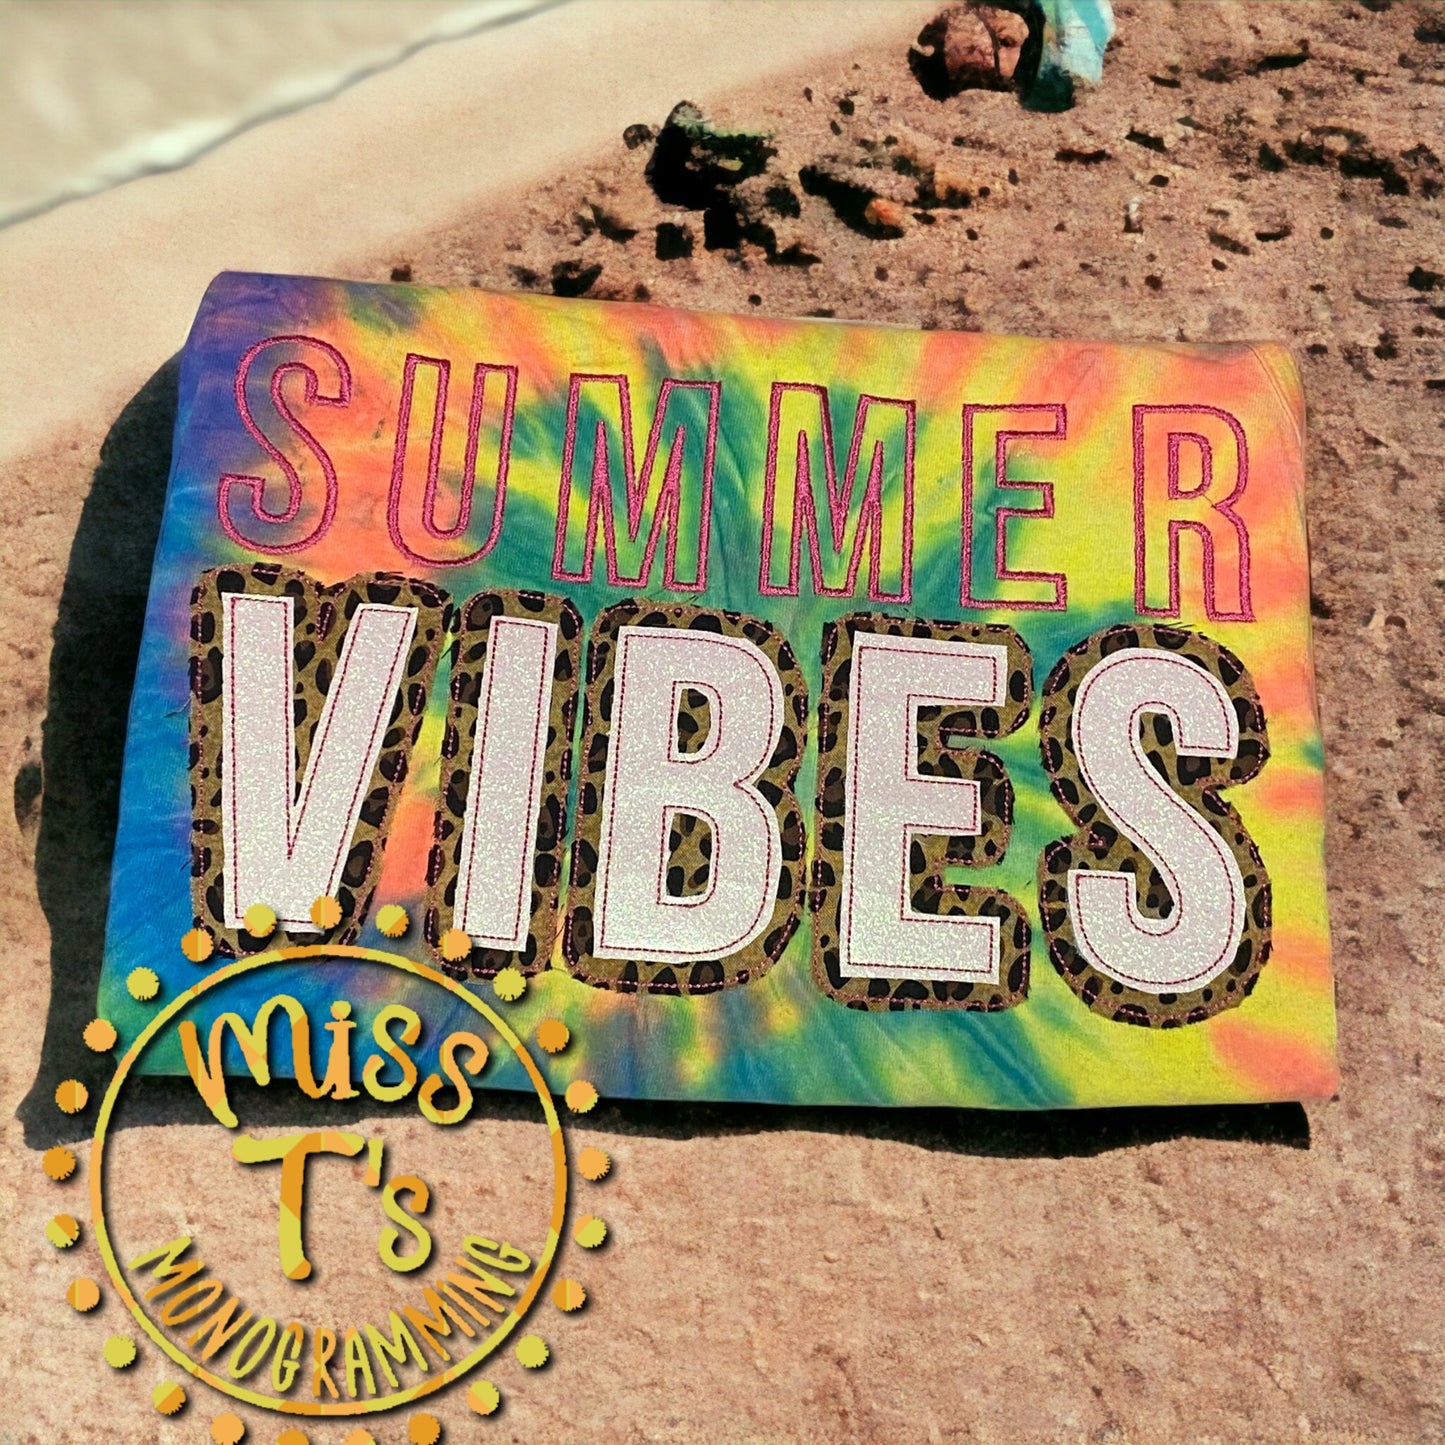 SUMMER VIBES TIE DYE EMBROIDERED TEE OR TANK